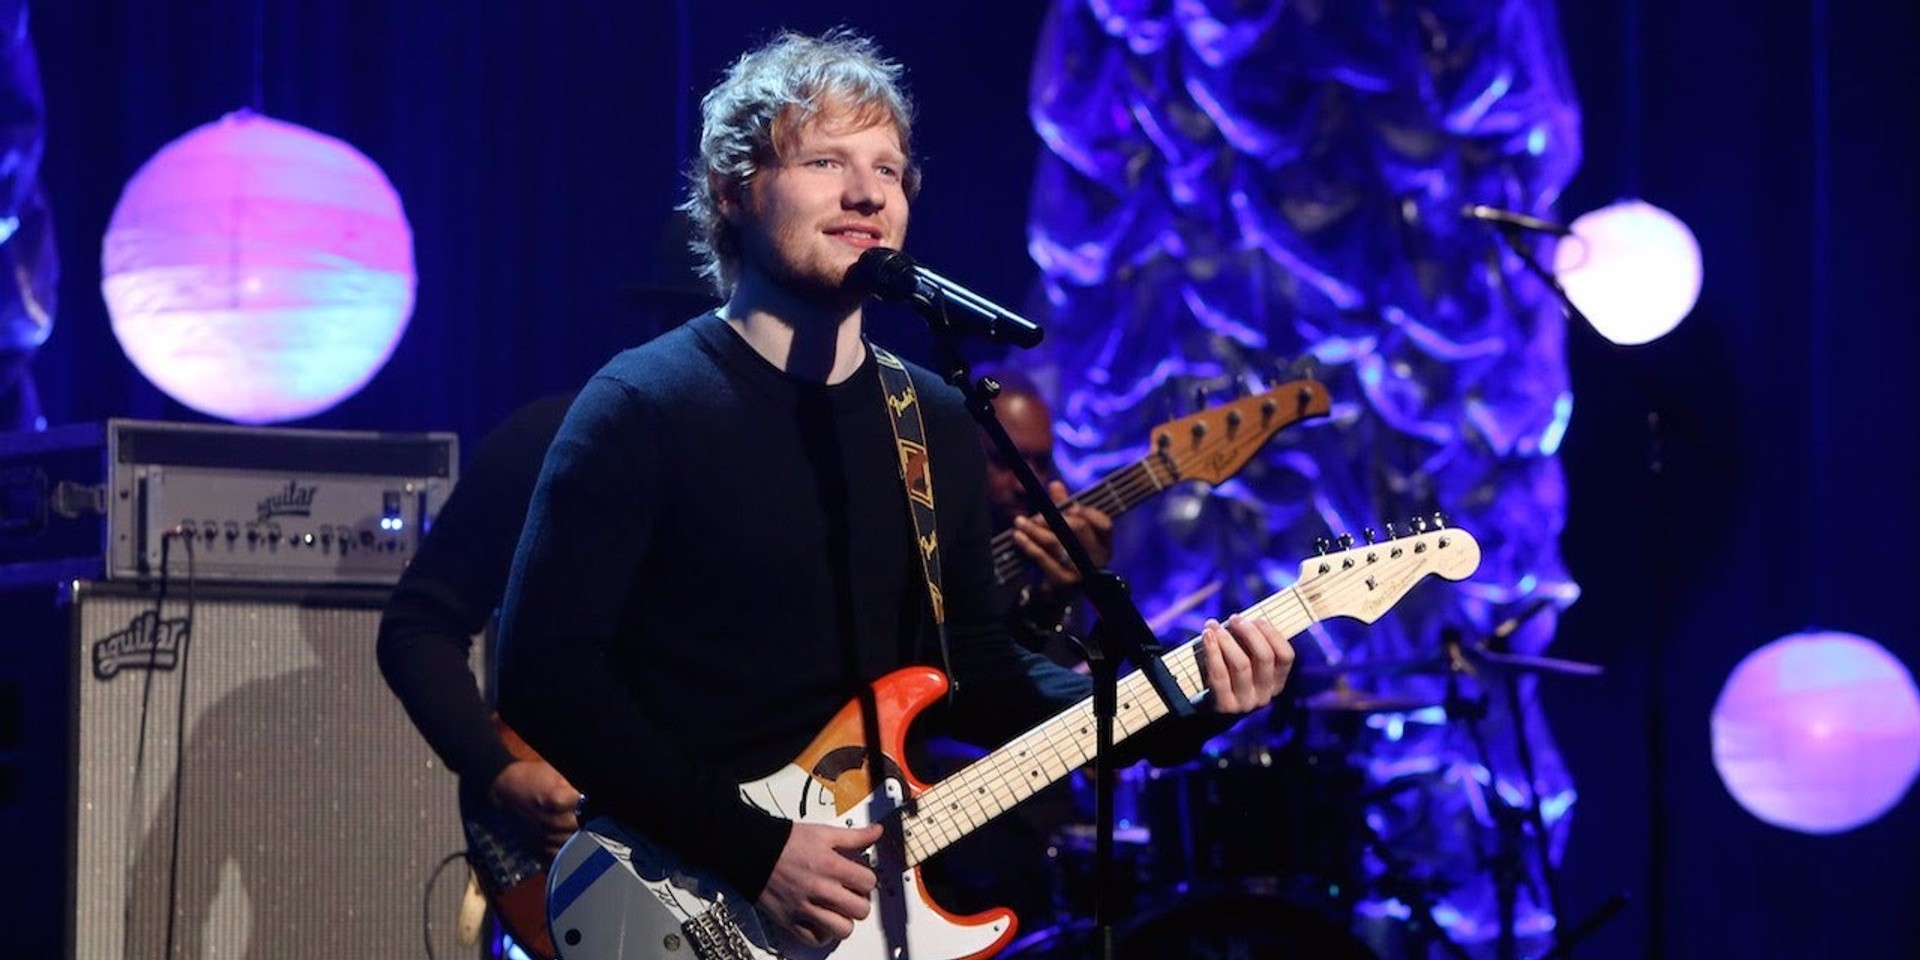 Filipino Sheerios call for Ed Sheeran's concert to be moved to MOA Arena